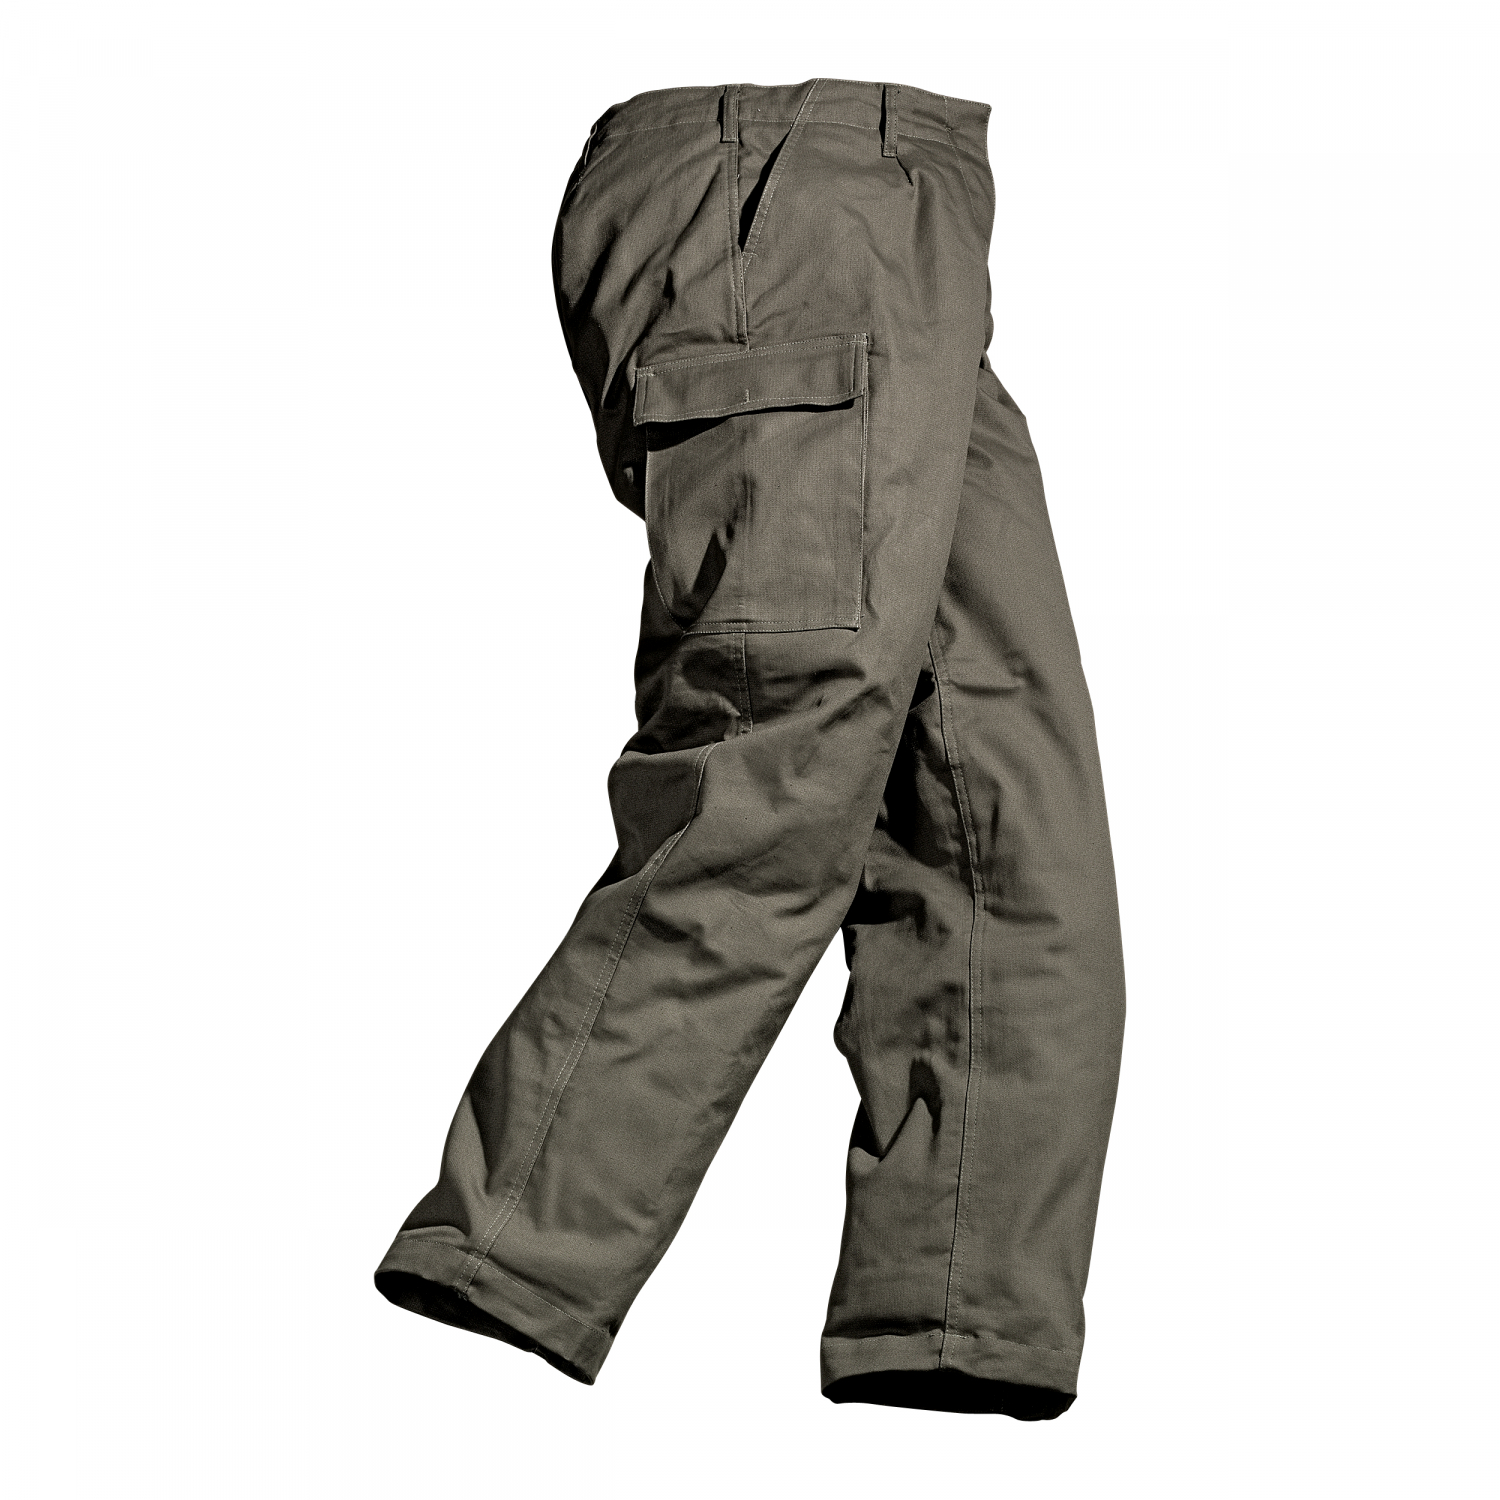 Insulated Trousers  Thermal Walking Trousers  GO Outdoors